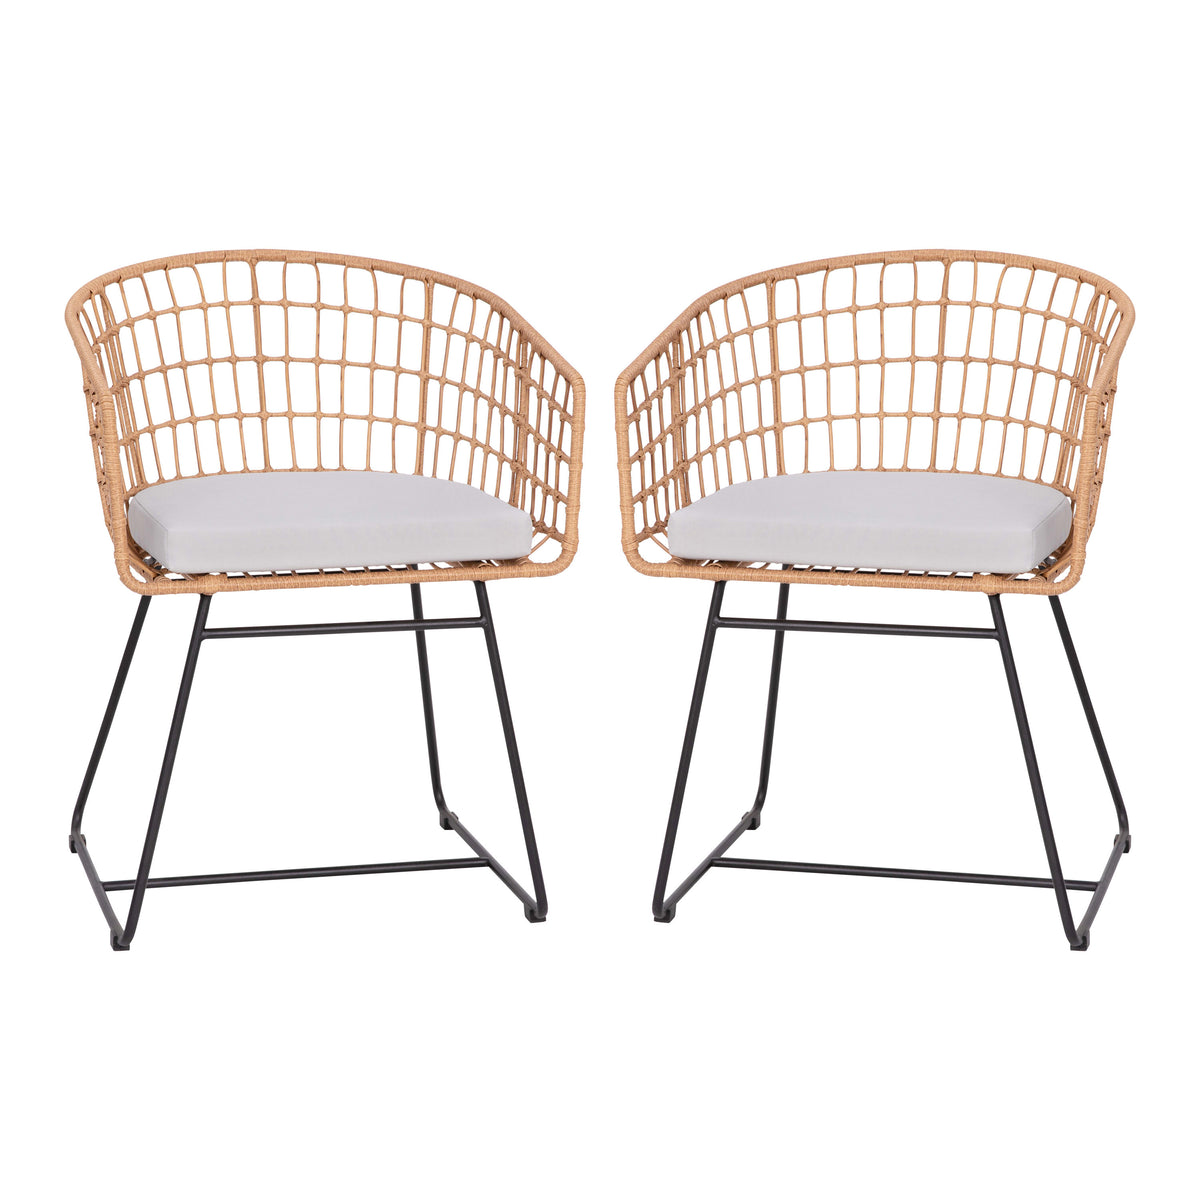 Light Gray Cushion/Natural Frame |#| 2PK Indoor/Outdoor Natural Boho Rattan Rope Club Chairs-Light Gray Seat Cushions